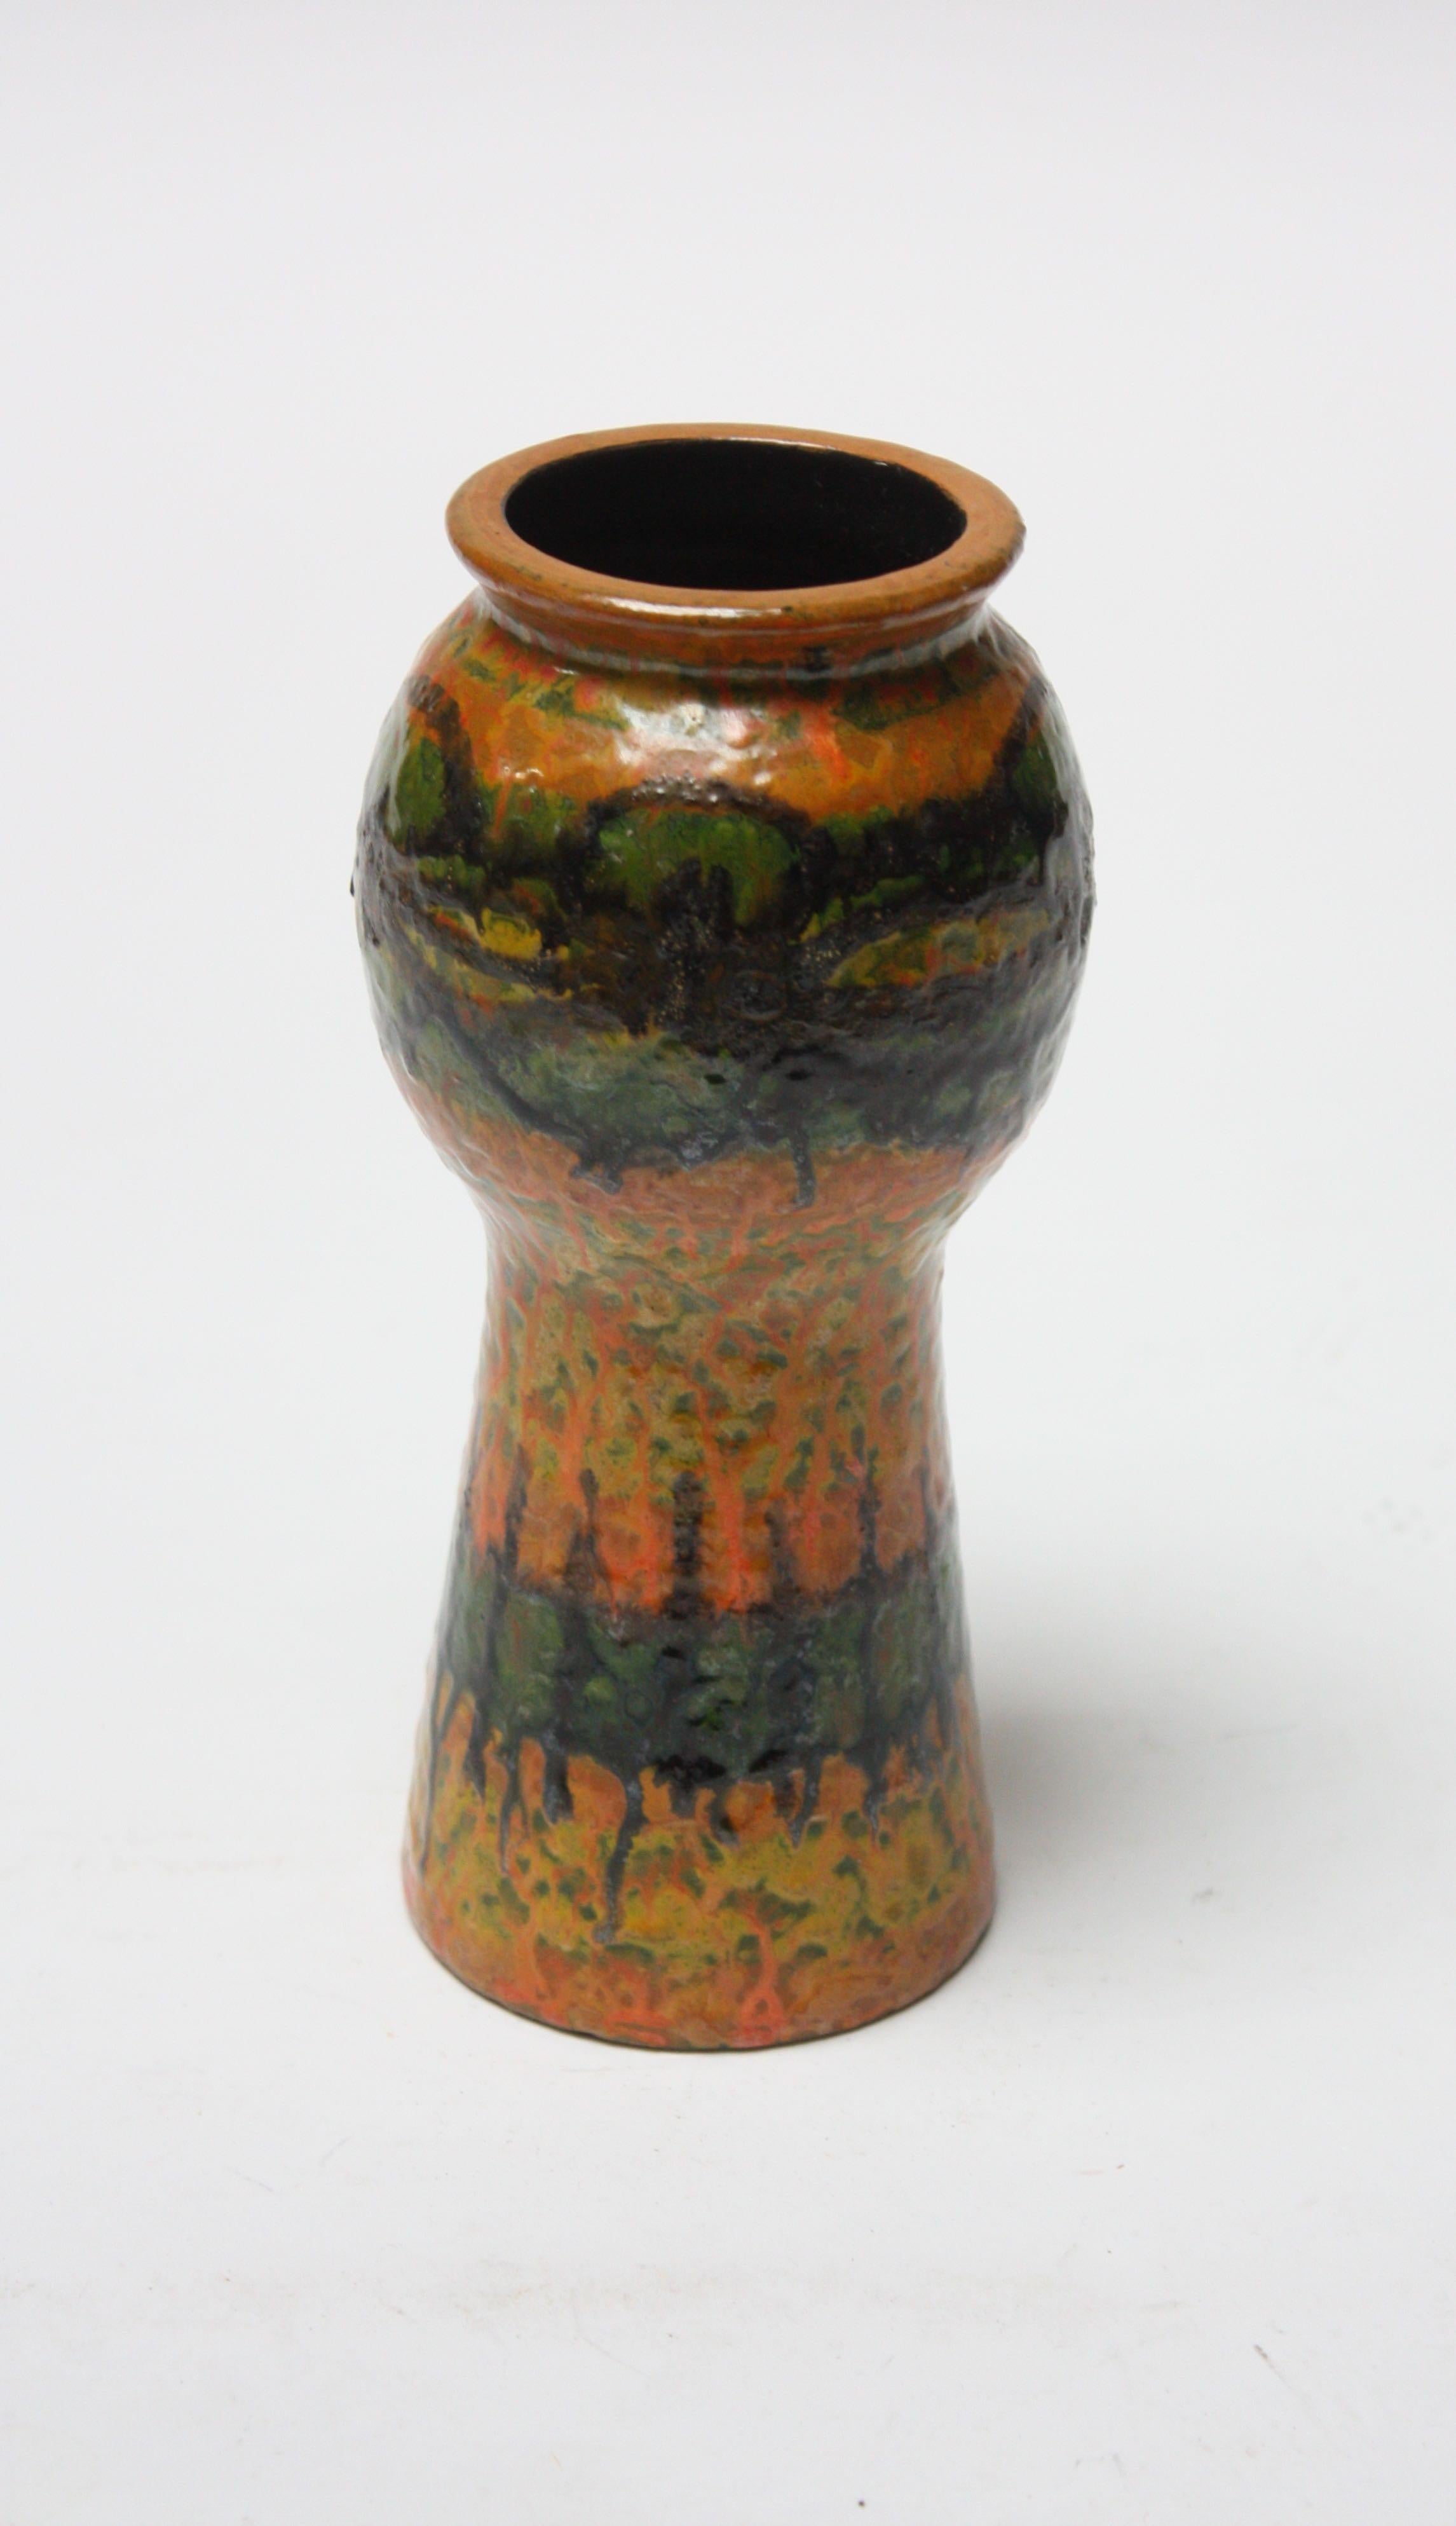 Small scale studio ceramic vase circa 1960s (likely Italian but unmarked). Stylish pattern and attractive, bold colors in green, ochre, orange, yellow, and black.
Measures: Diameter 3.25